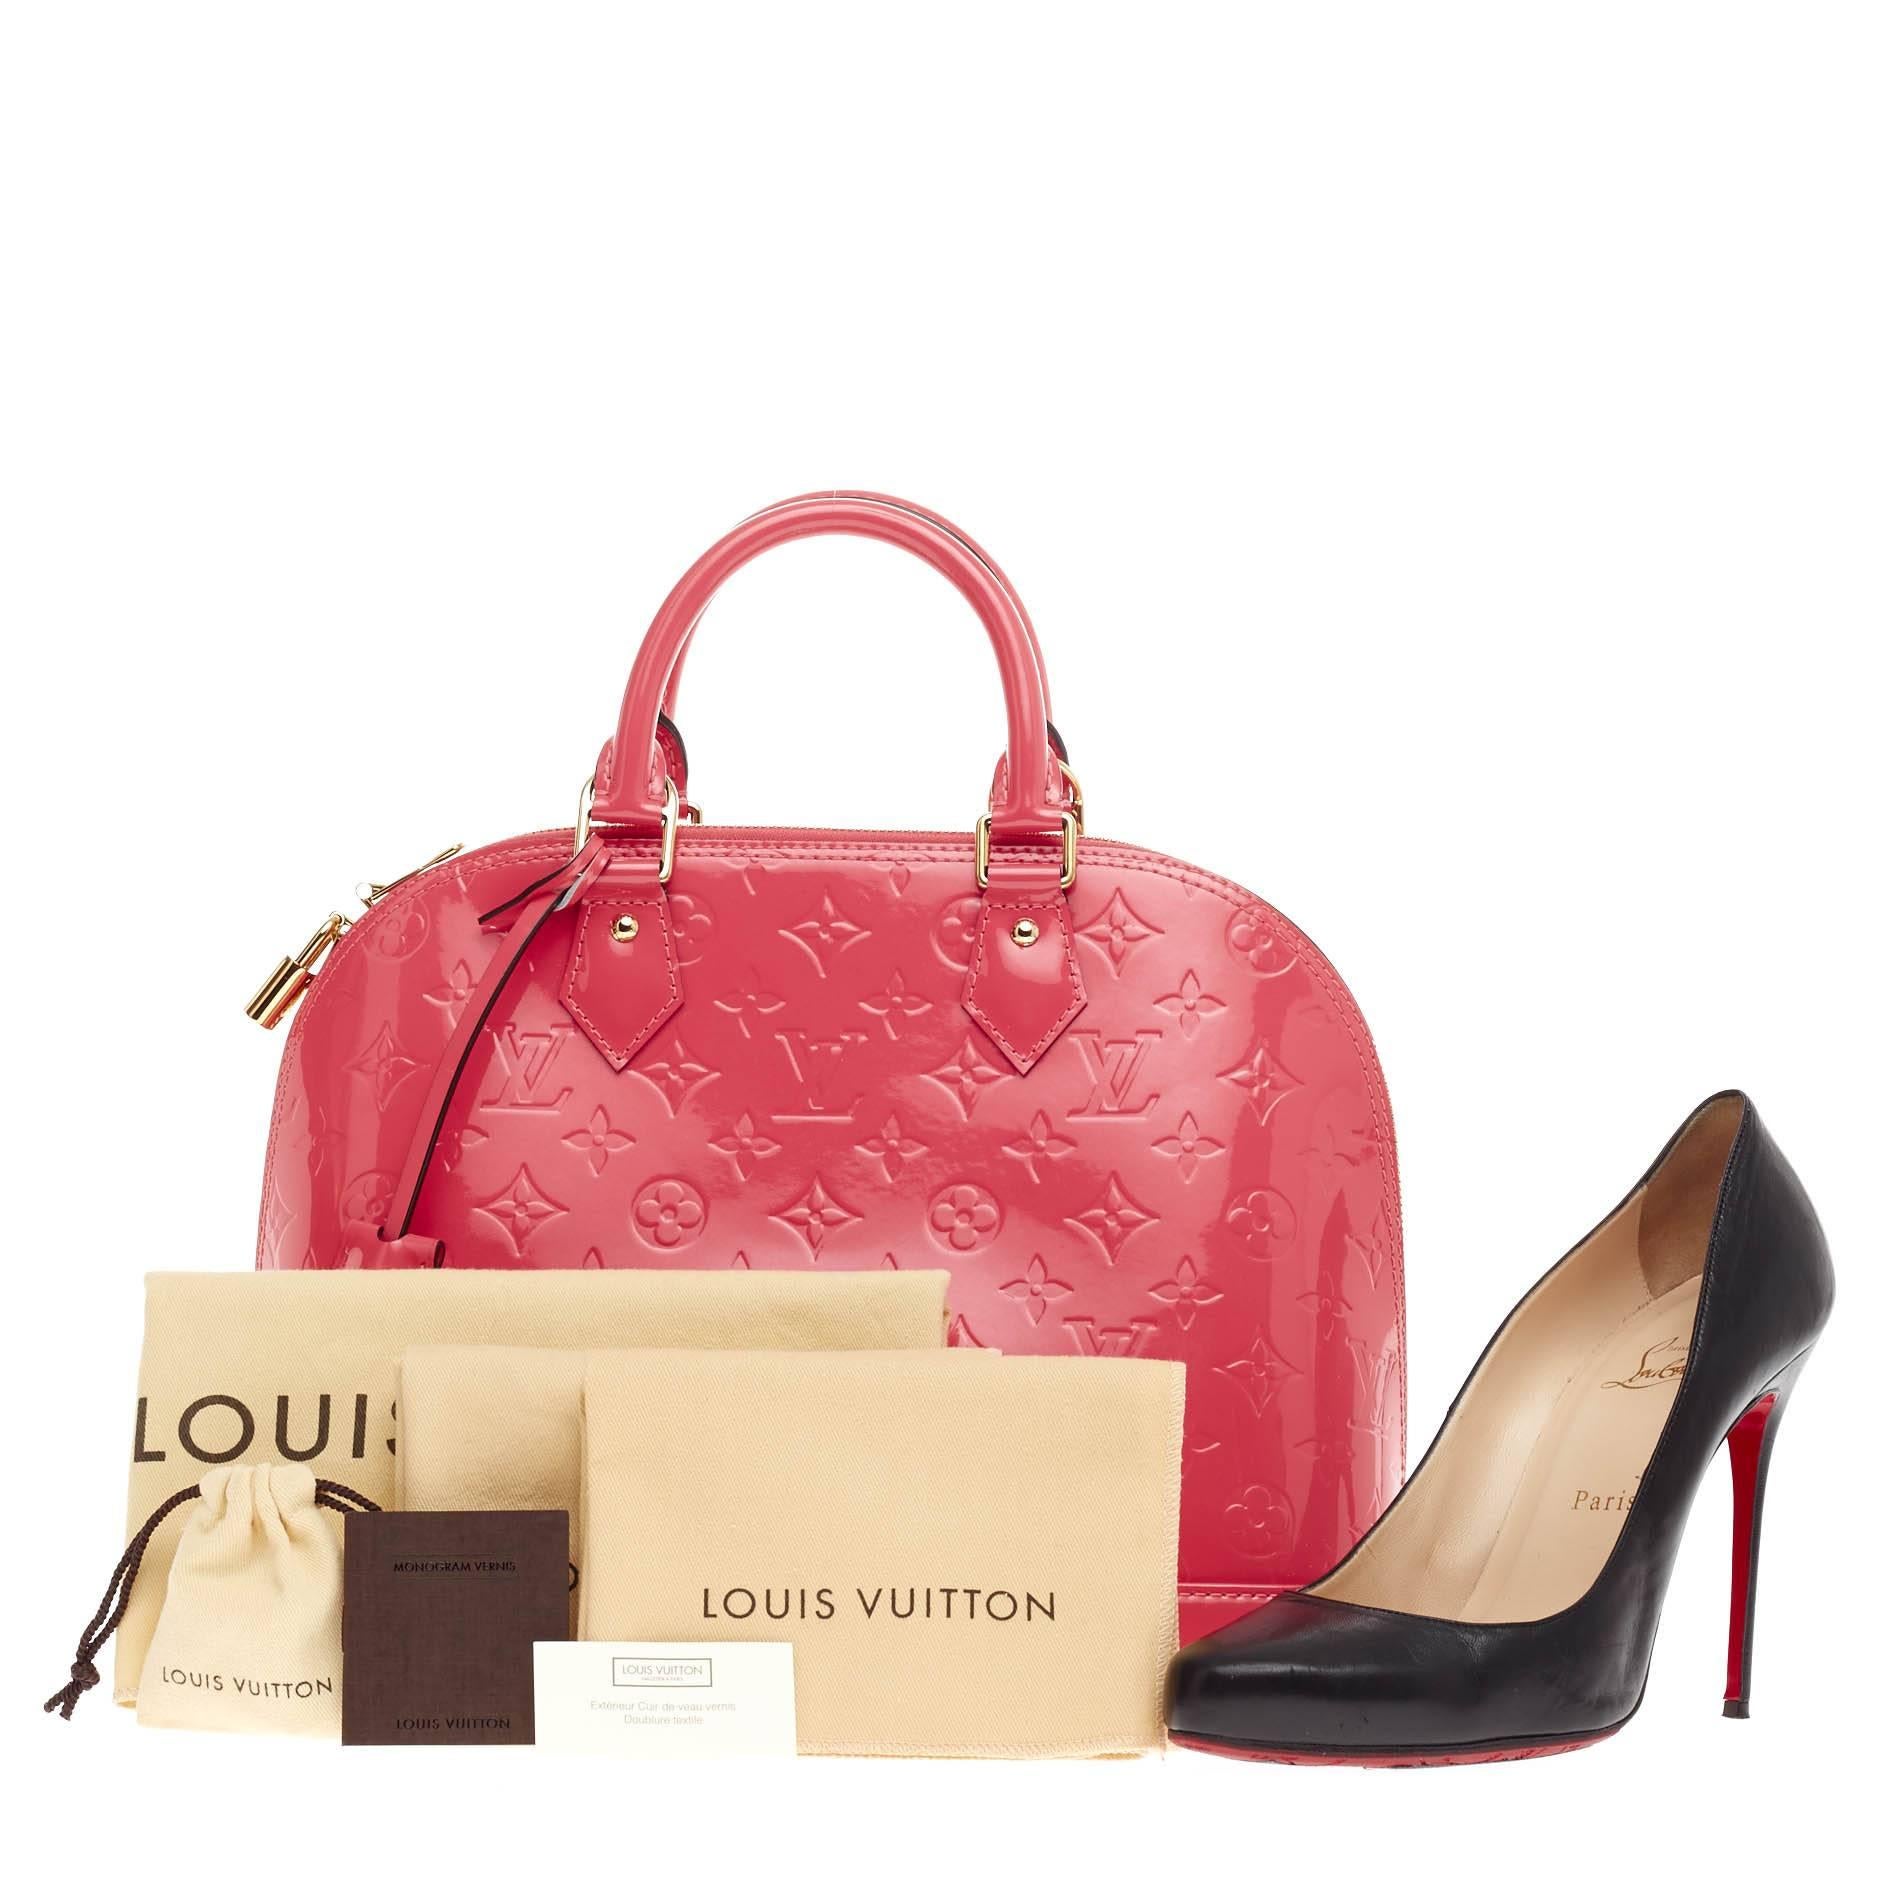 This authentic Louis Vuitton Alma Monogram Vernis PM is a fresh and elegant spin on a classic style that is perfect for all seasons. Crafted from Louis Vuitton's glossy vernis patent leather in beautiful rose pop pink, this dome-shaped satchel